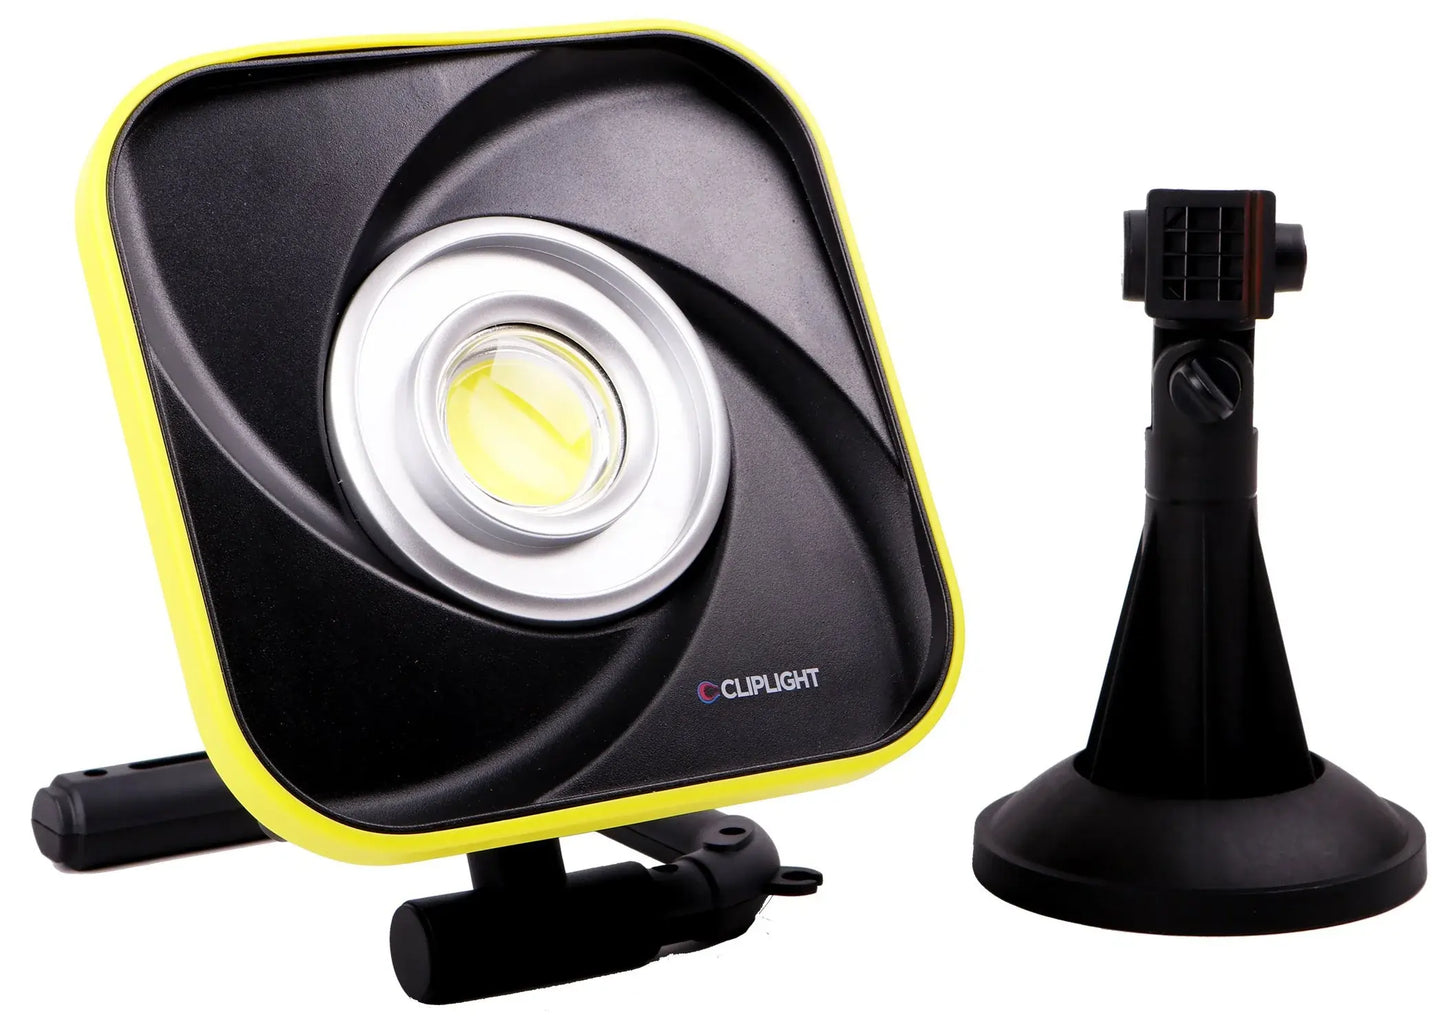 Cliplight Spotlight Rechargeable LED Work Light with Magnetic Base